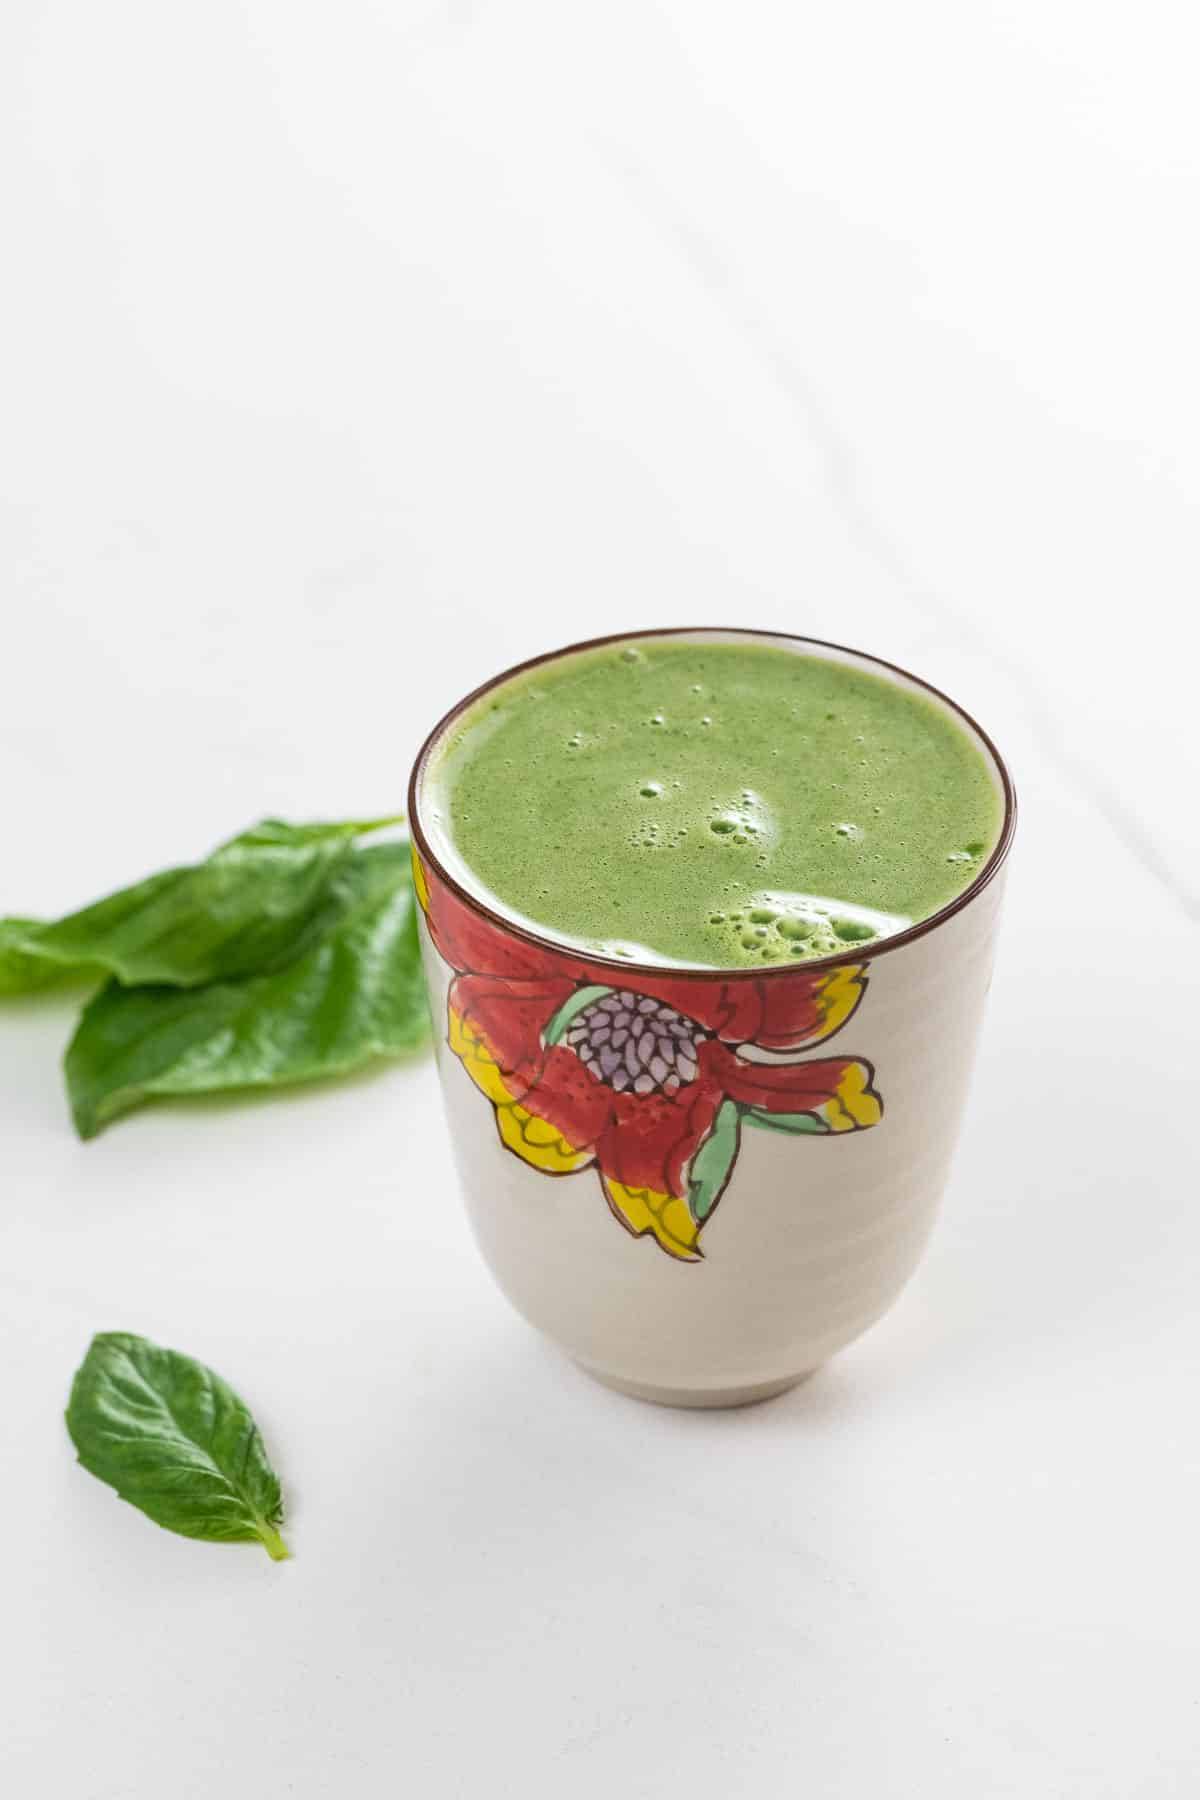 asian pear juice with basil, lemon, and celery in a decorative glass with basil leaves